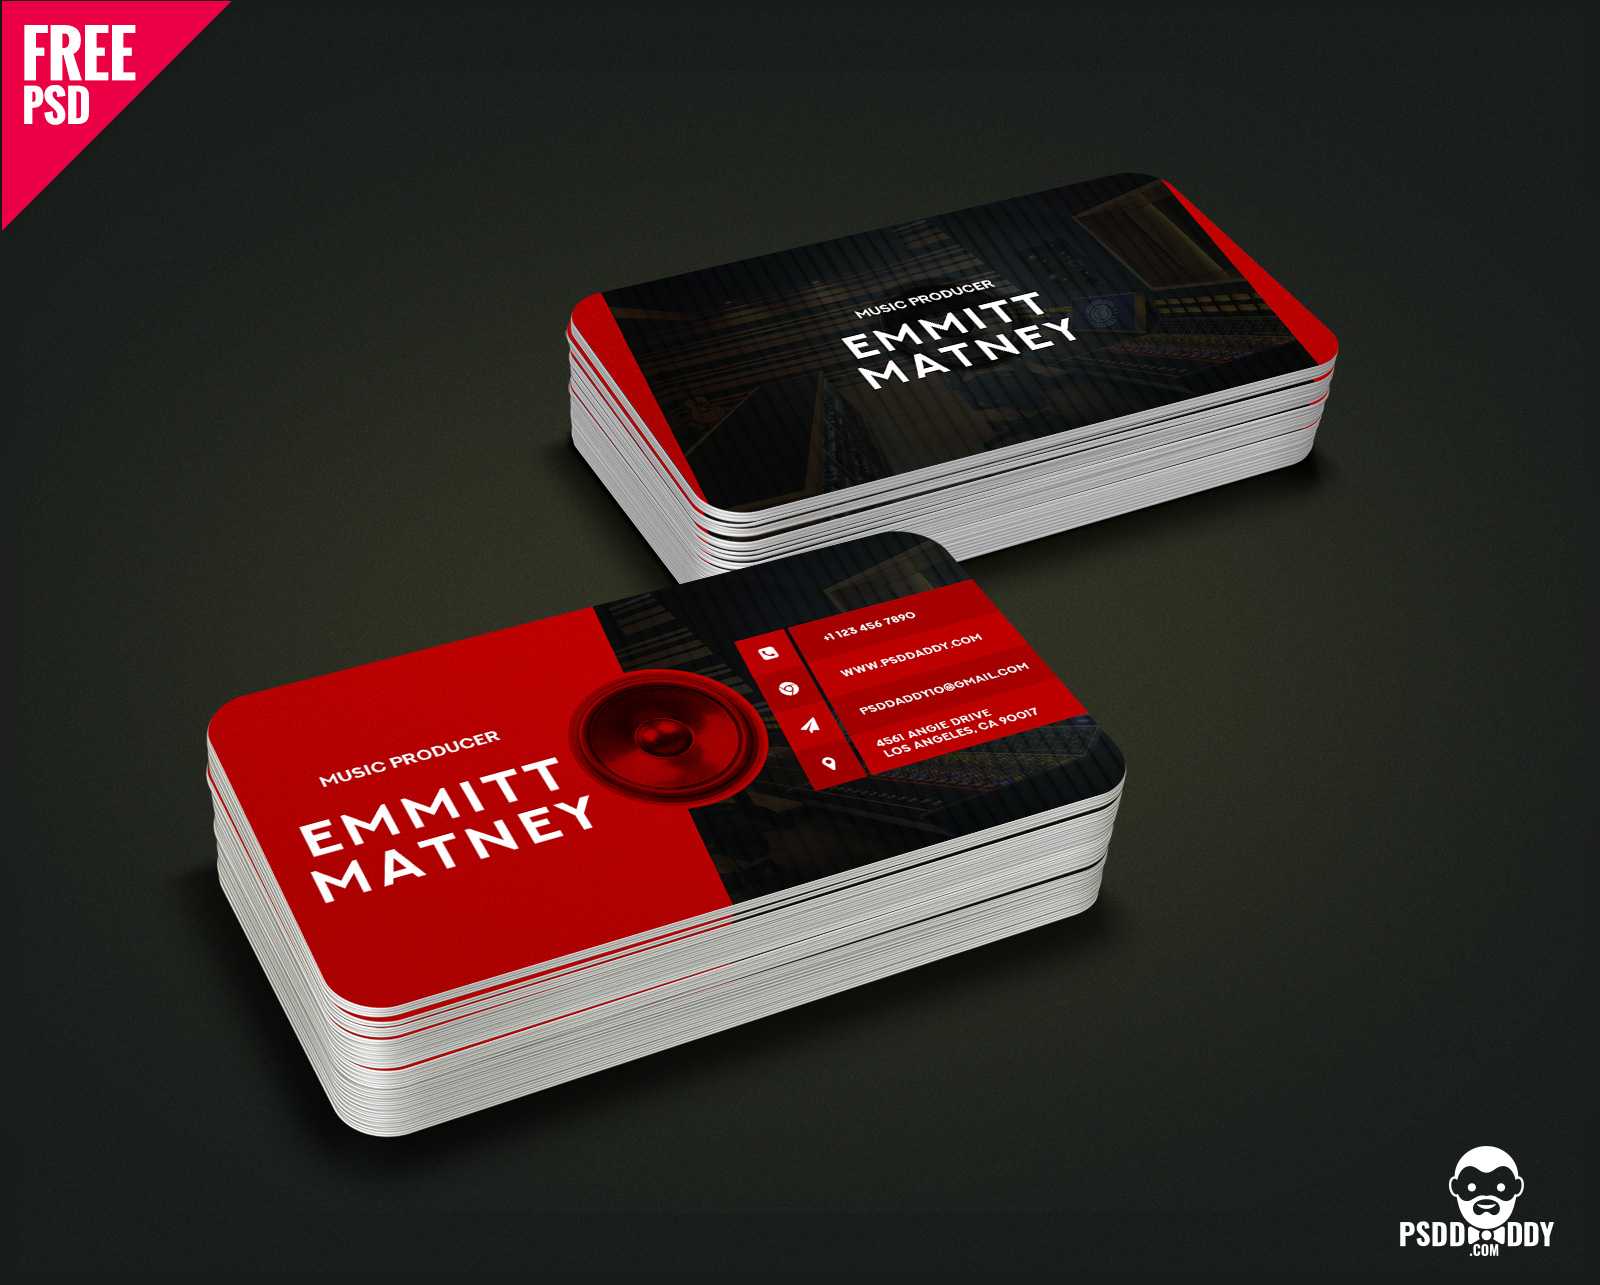 Download] Music Visiting Card Free Psd | Psddaddy Within Free Psd Visiting Card Templates Download